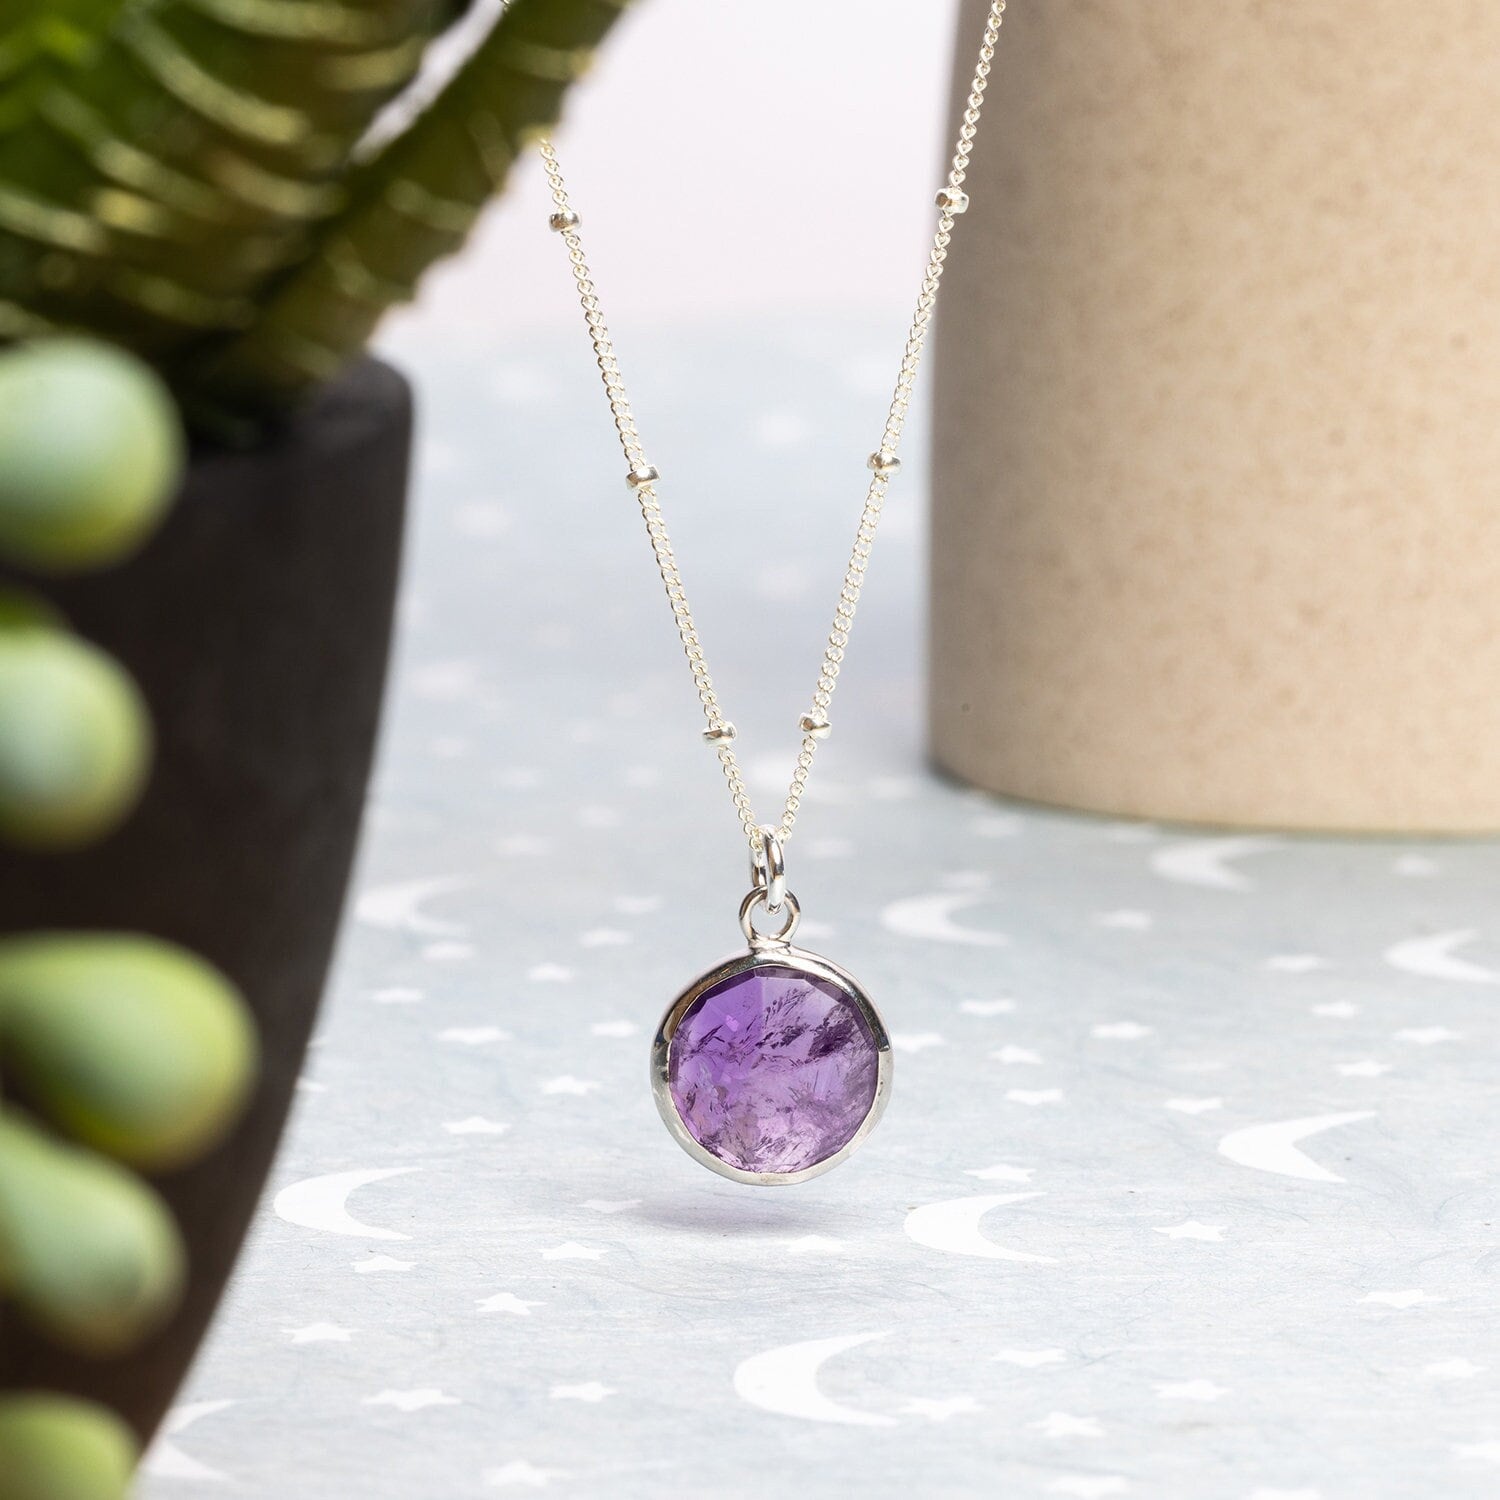 Amethyst Rounded Pendant 925 Sterling Silver Chain Necklace Necklaces Soul & Little Rose   